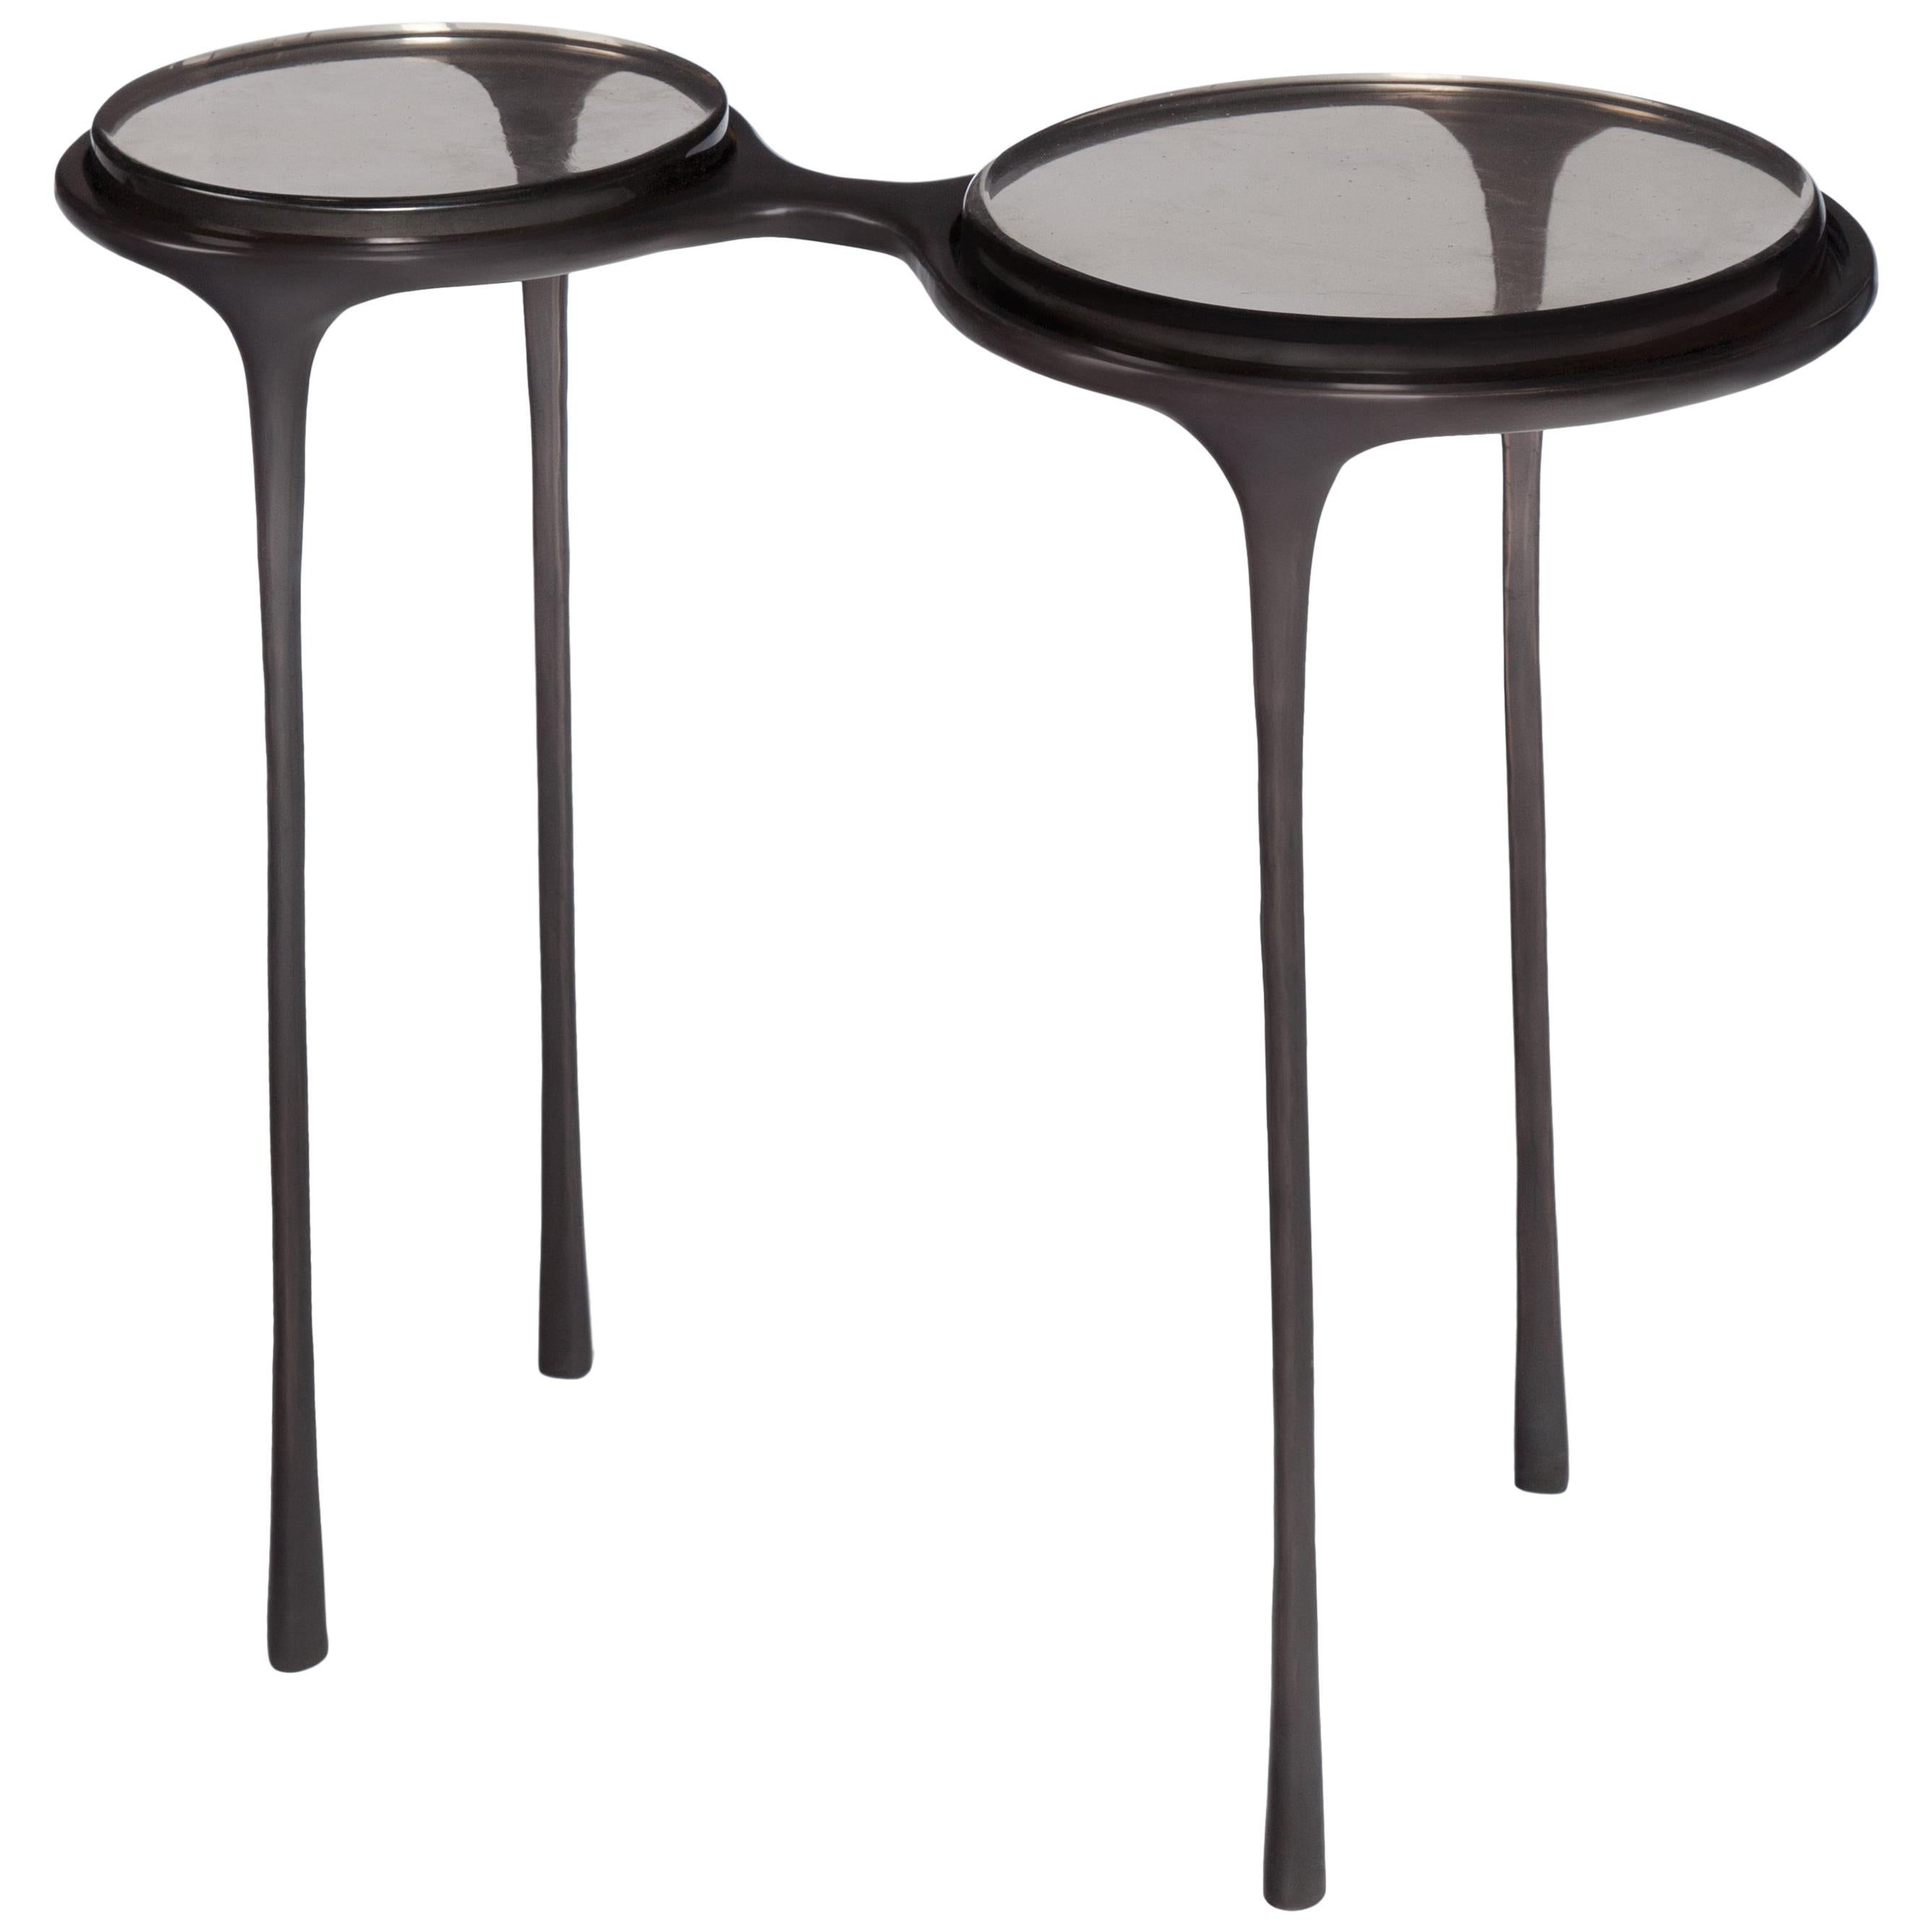 HOLLY HUNT Spectacles Table with Fog Cast Glass Top with Dark Bronze Base Finish